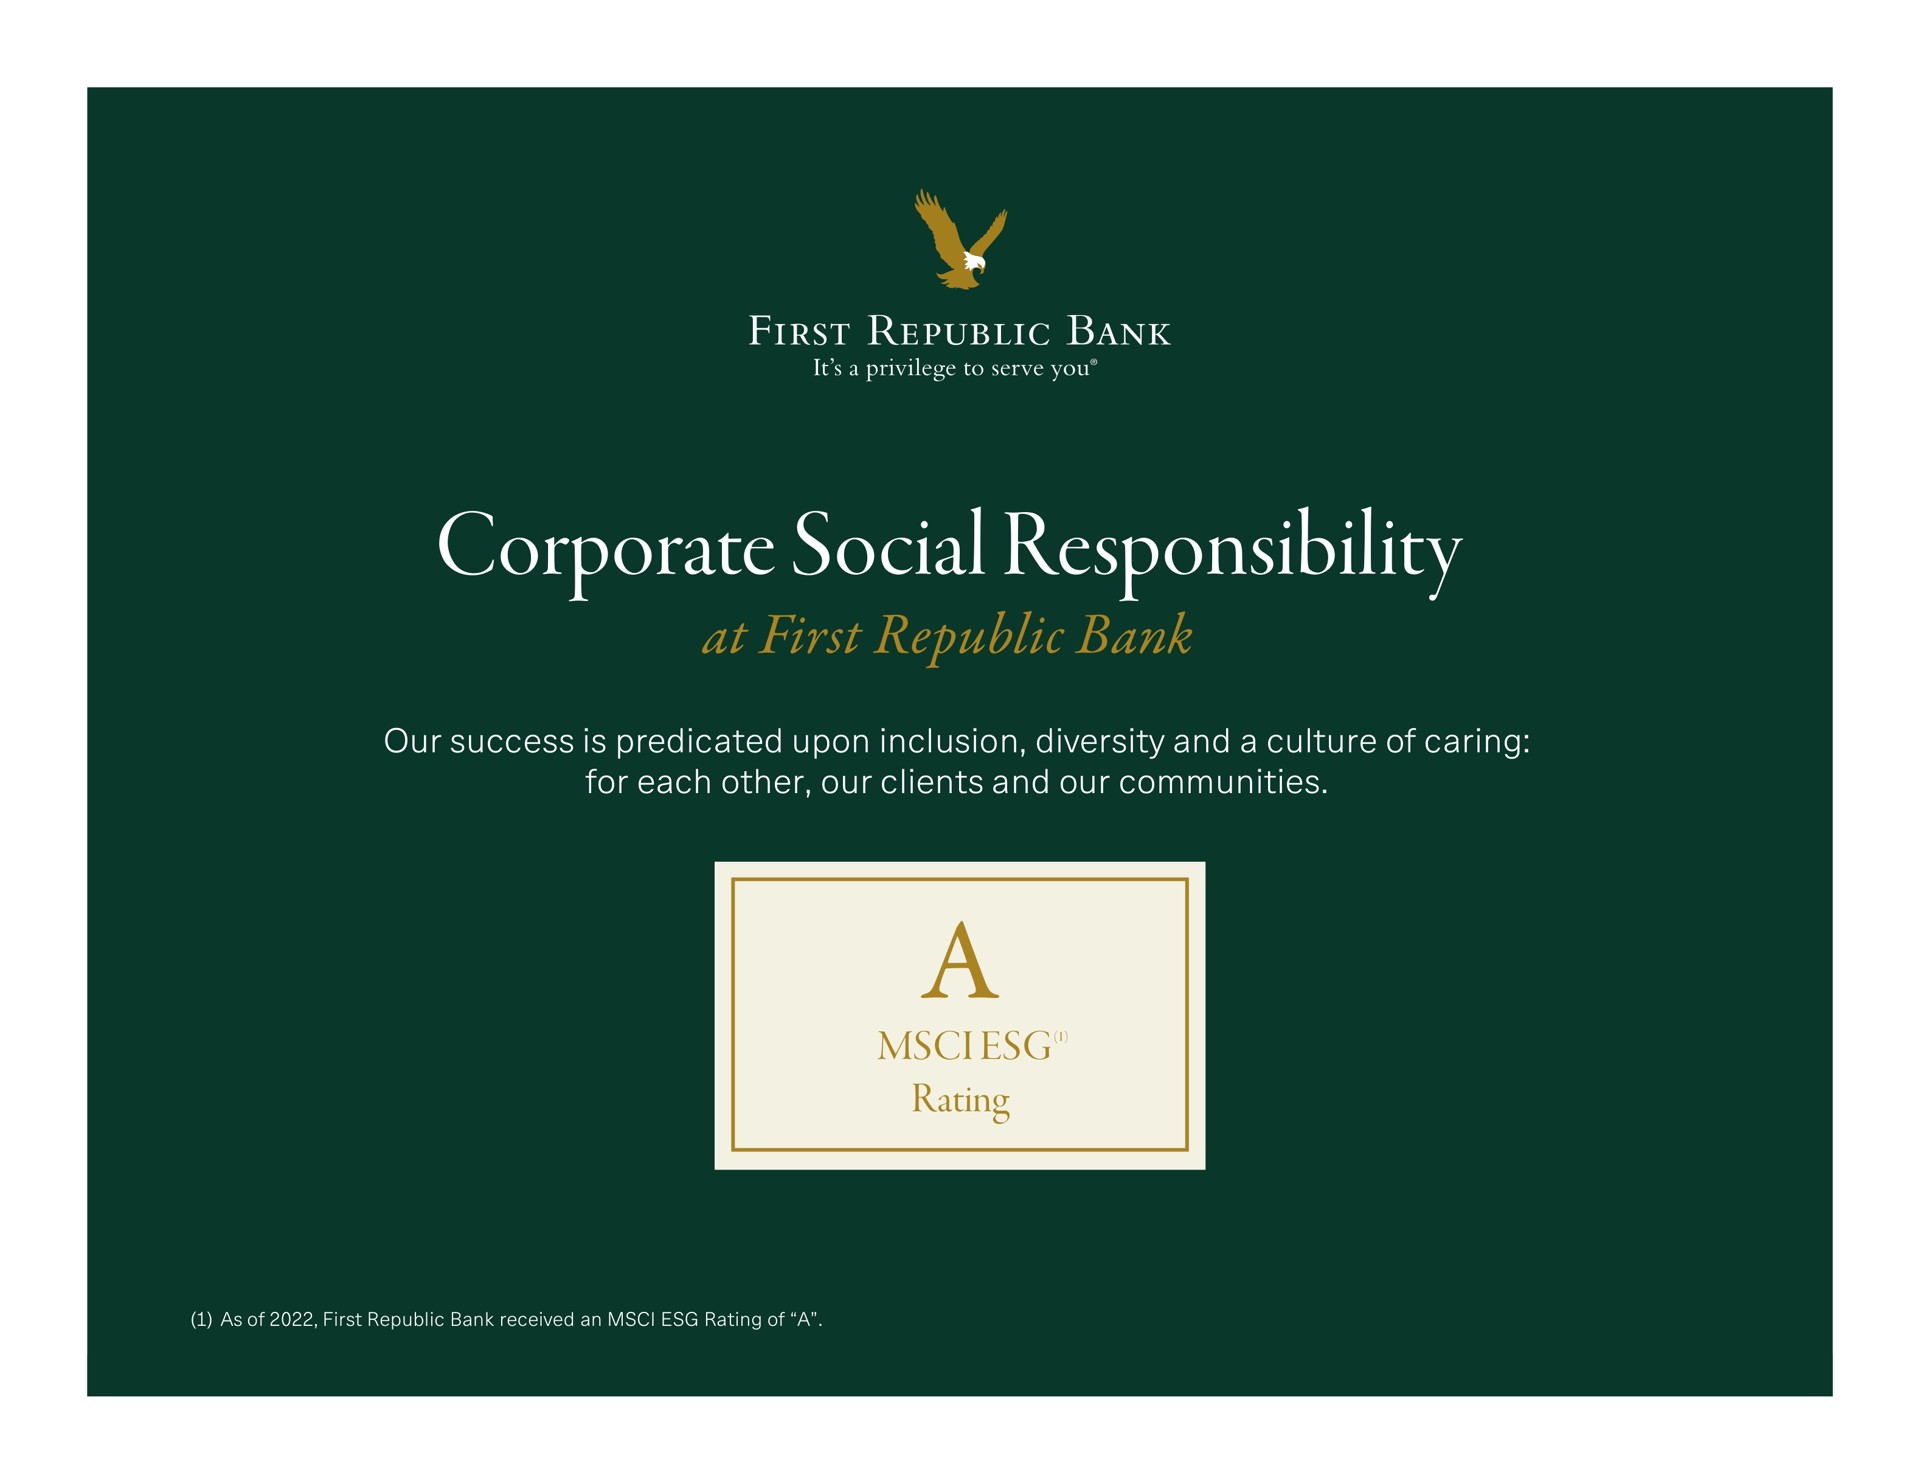 corporate social responsibility at first republic bank a rating ore | First Republic Bank